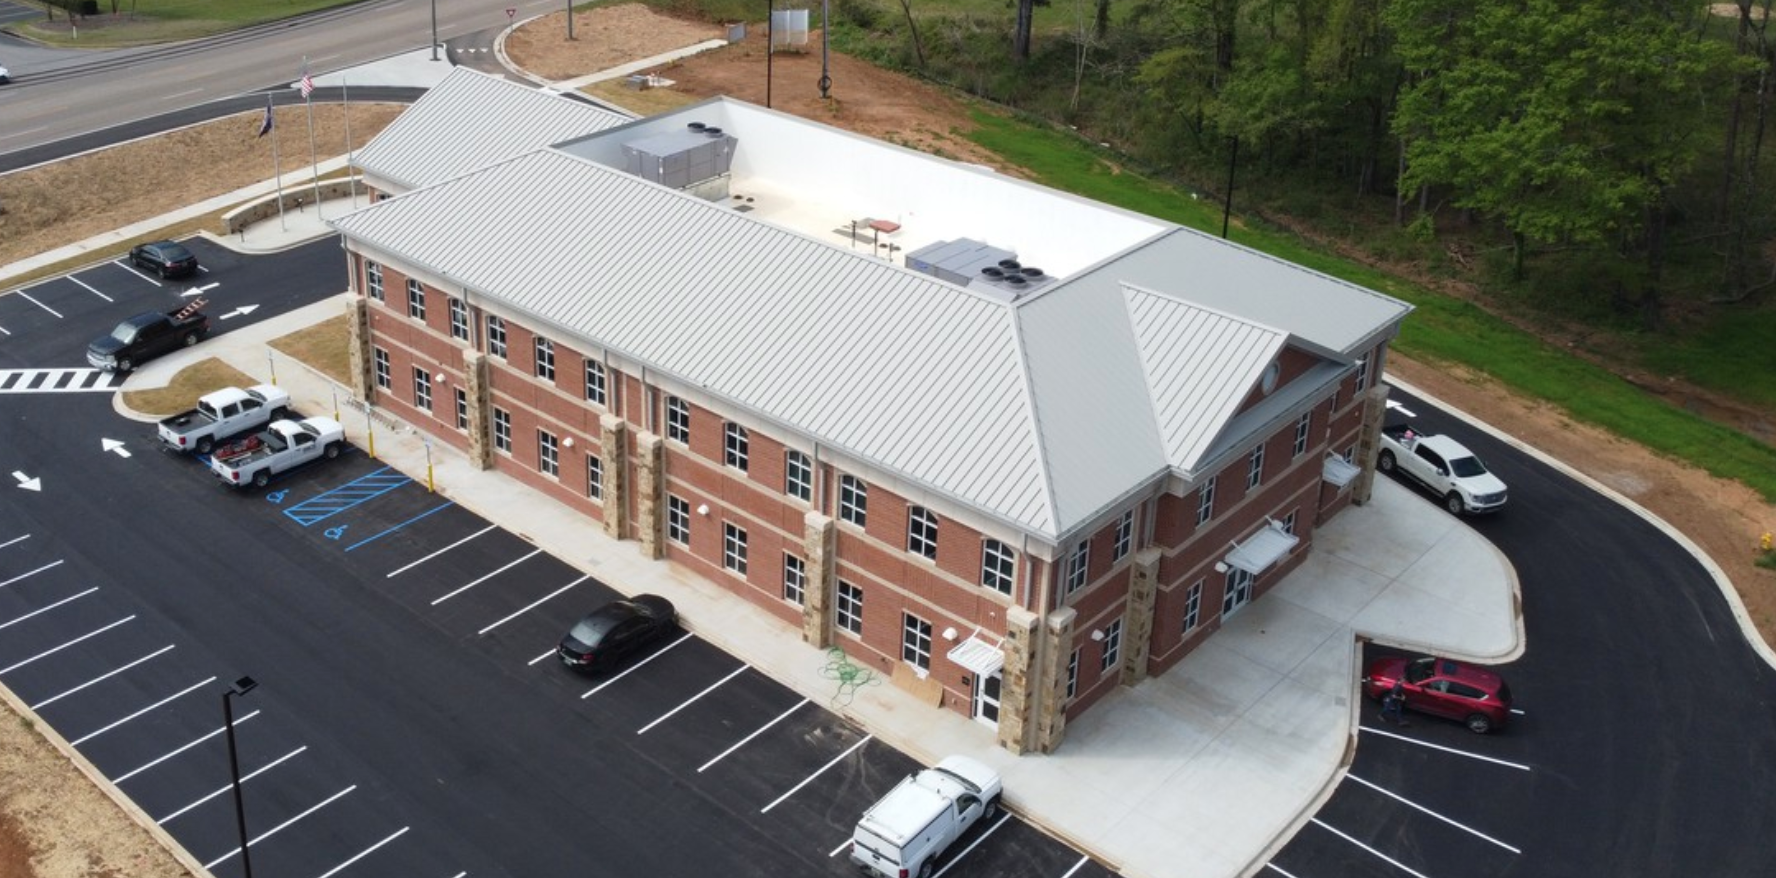 Ribbon-cutting scheduled for new TCS Board of Education building